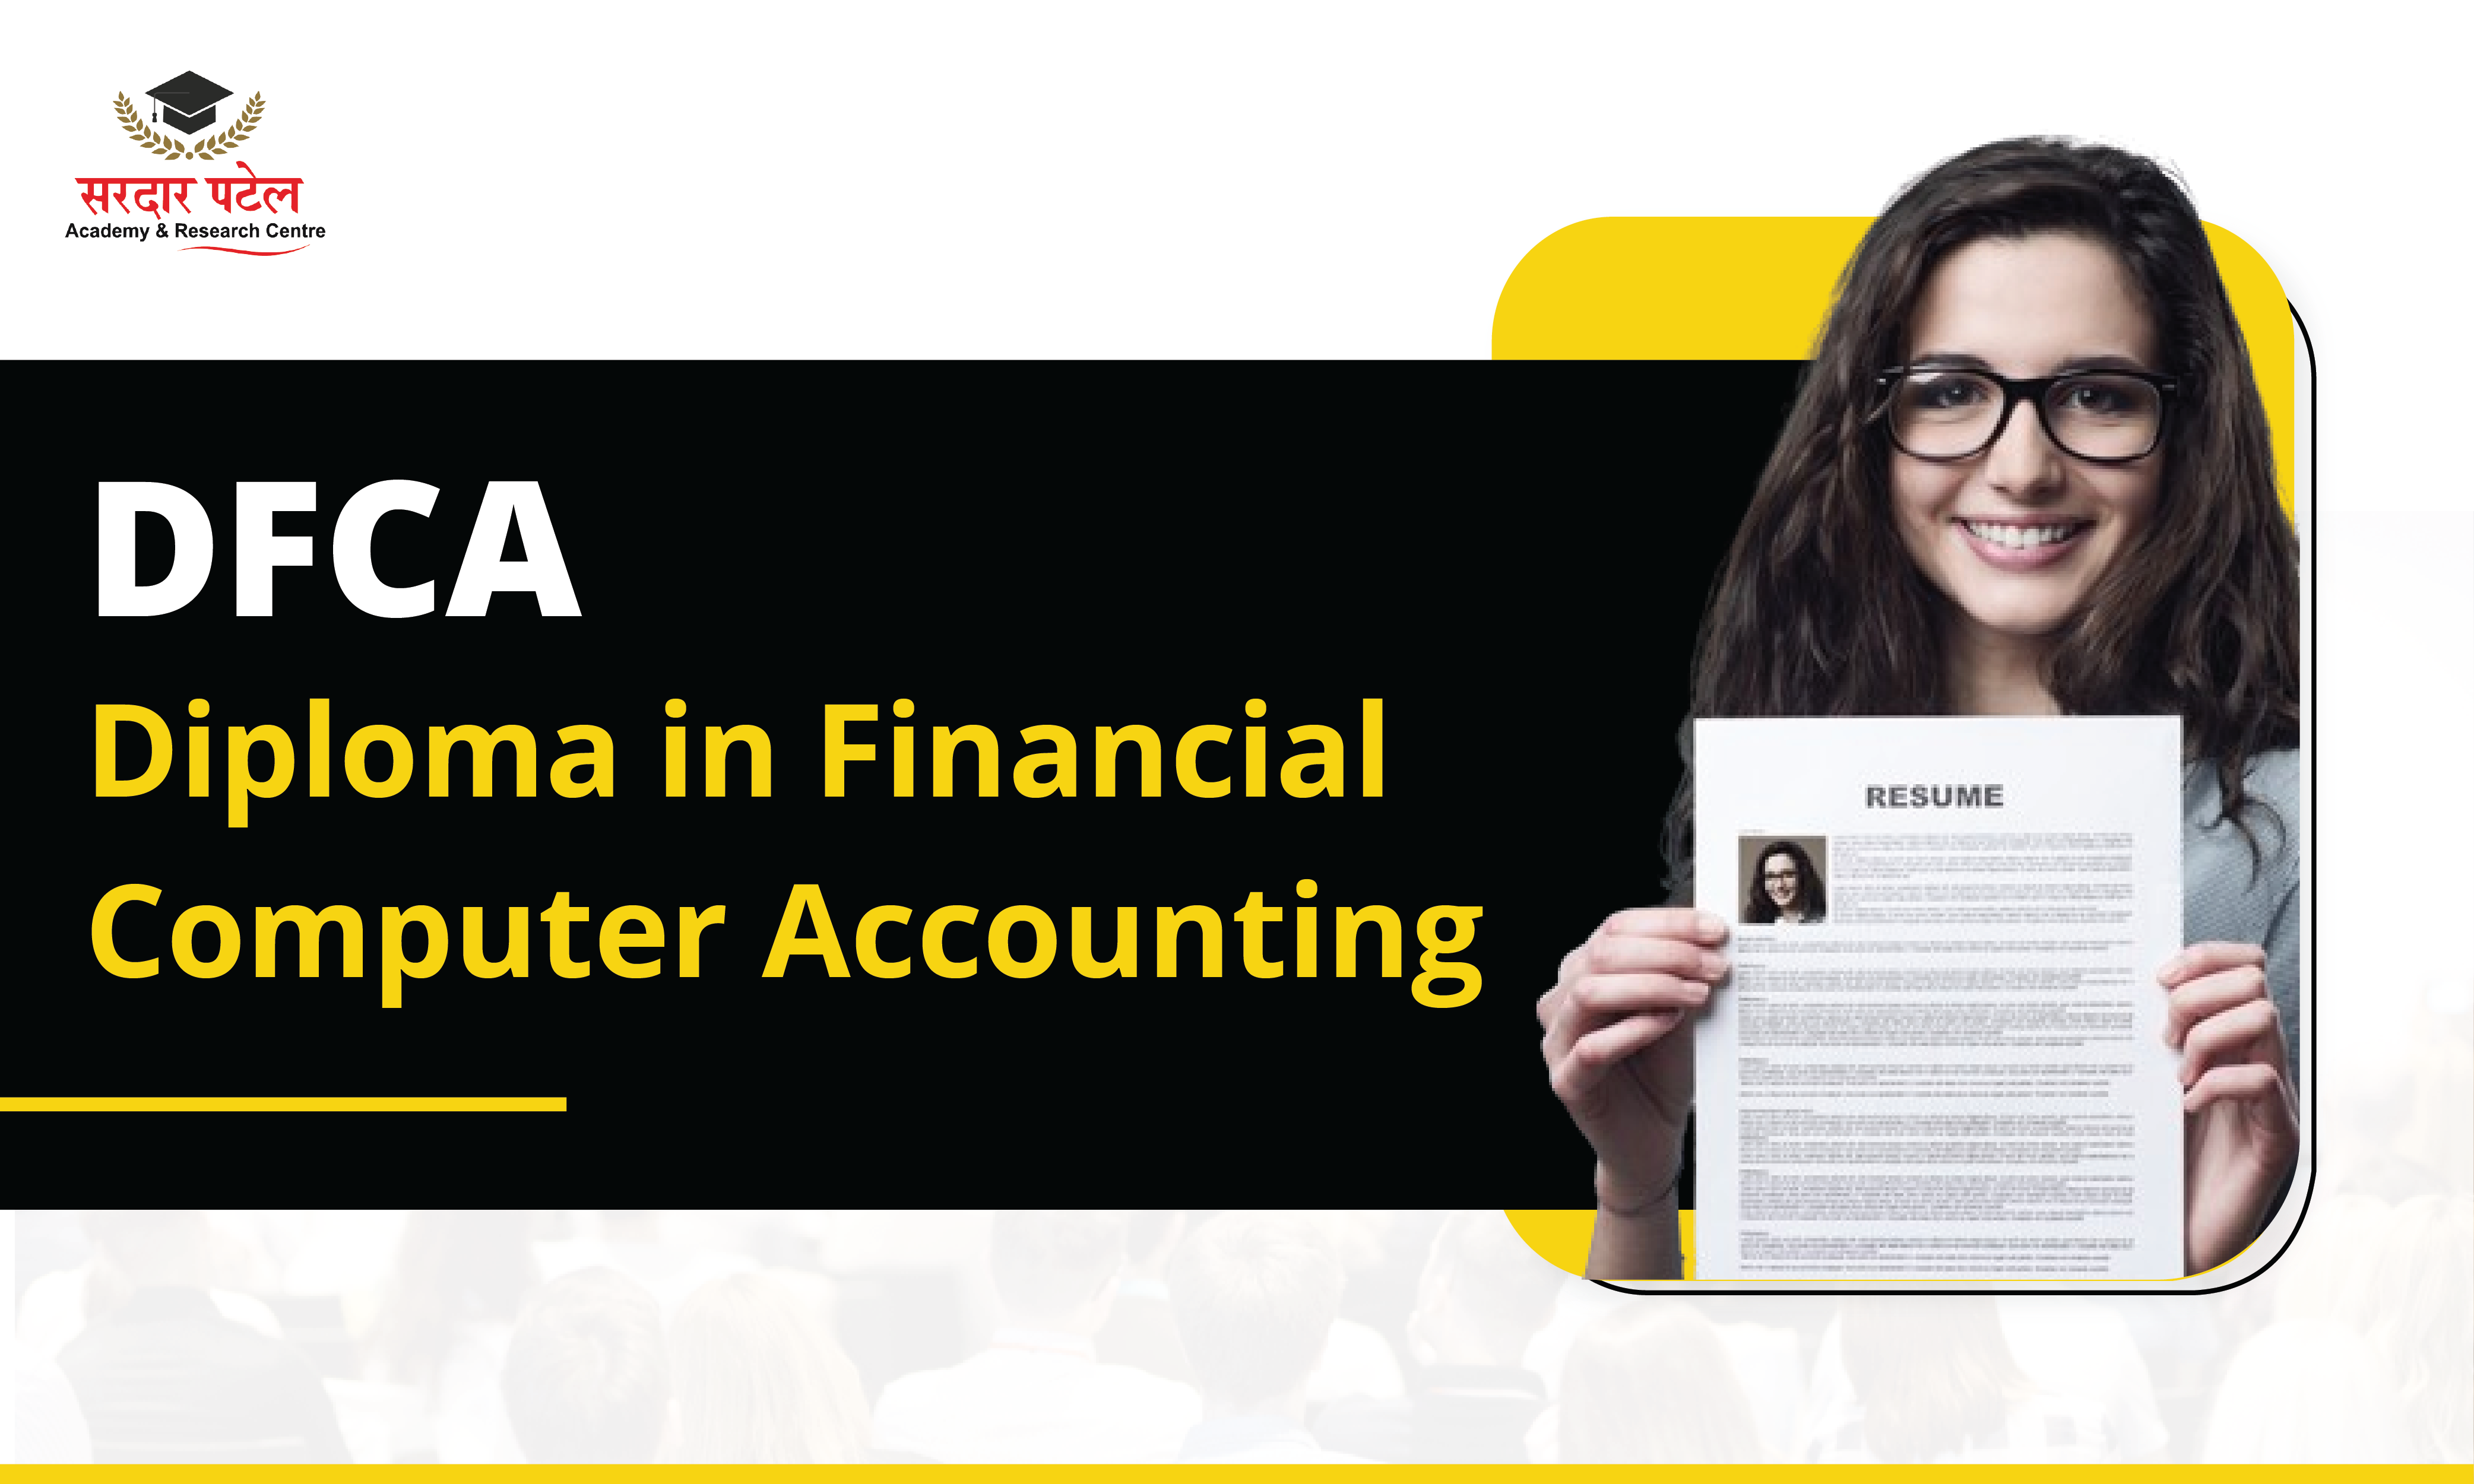 Diploma in Financial Computer Accounting-(DFCA)